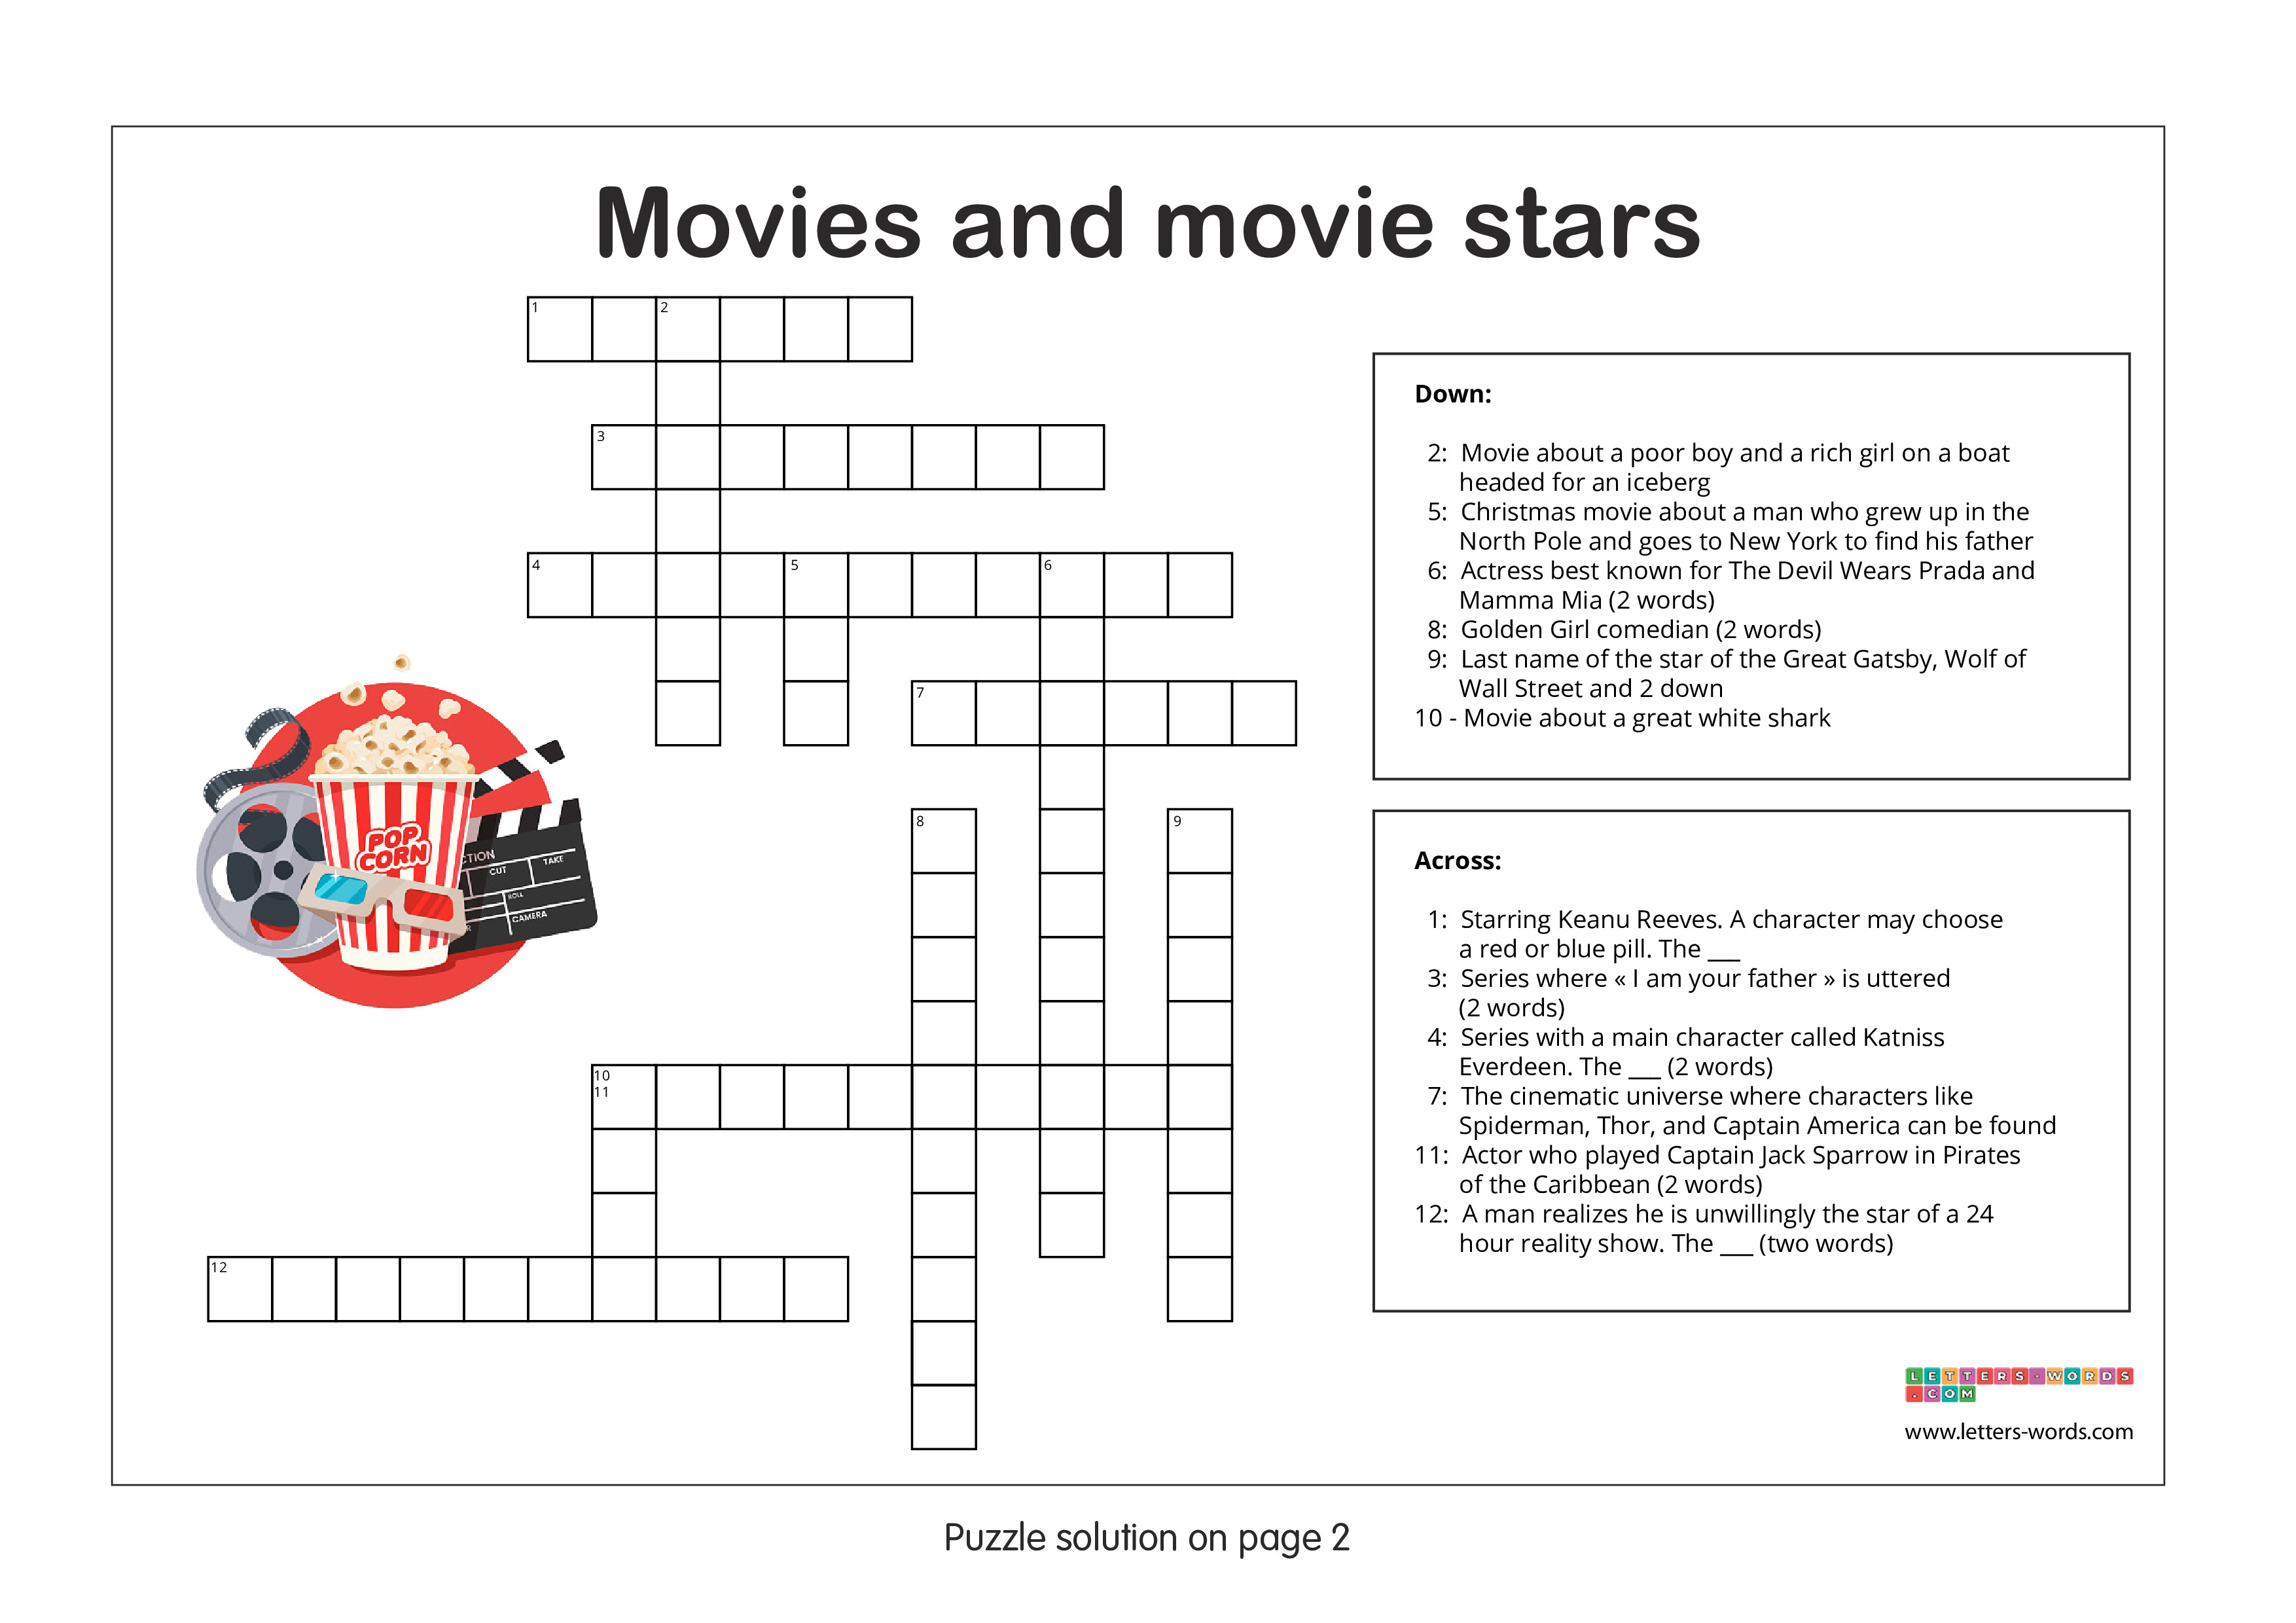 Crossword puzzles for children aged 12+ - Movies and Stars